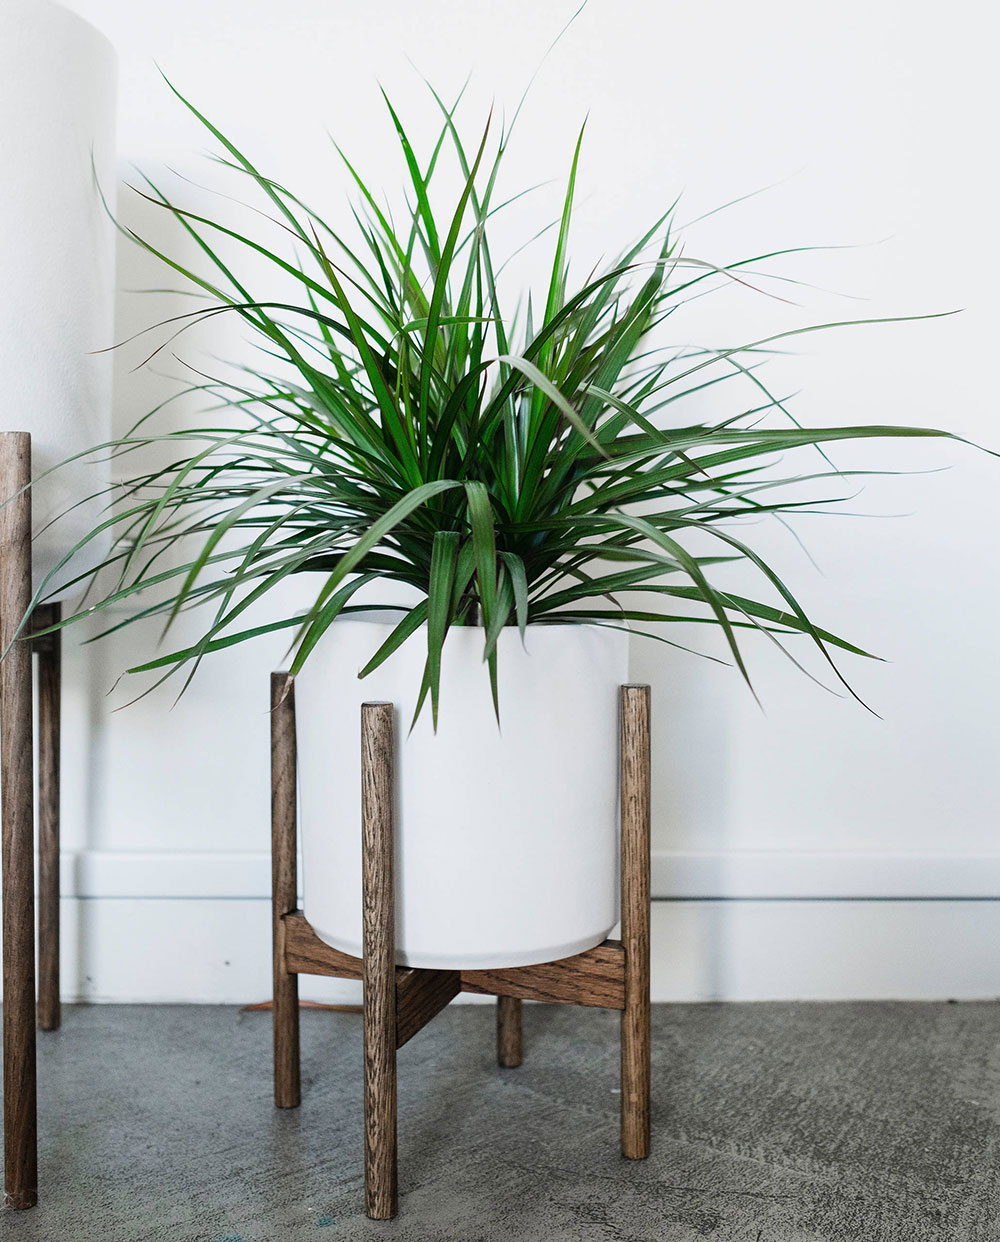 Electric-by-Oh-beauty-Interiors Are you buying a plant stand?  Think about how to decorate with it.